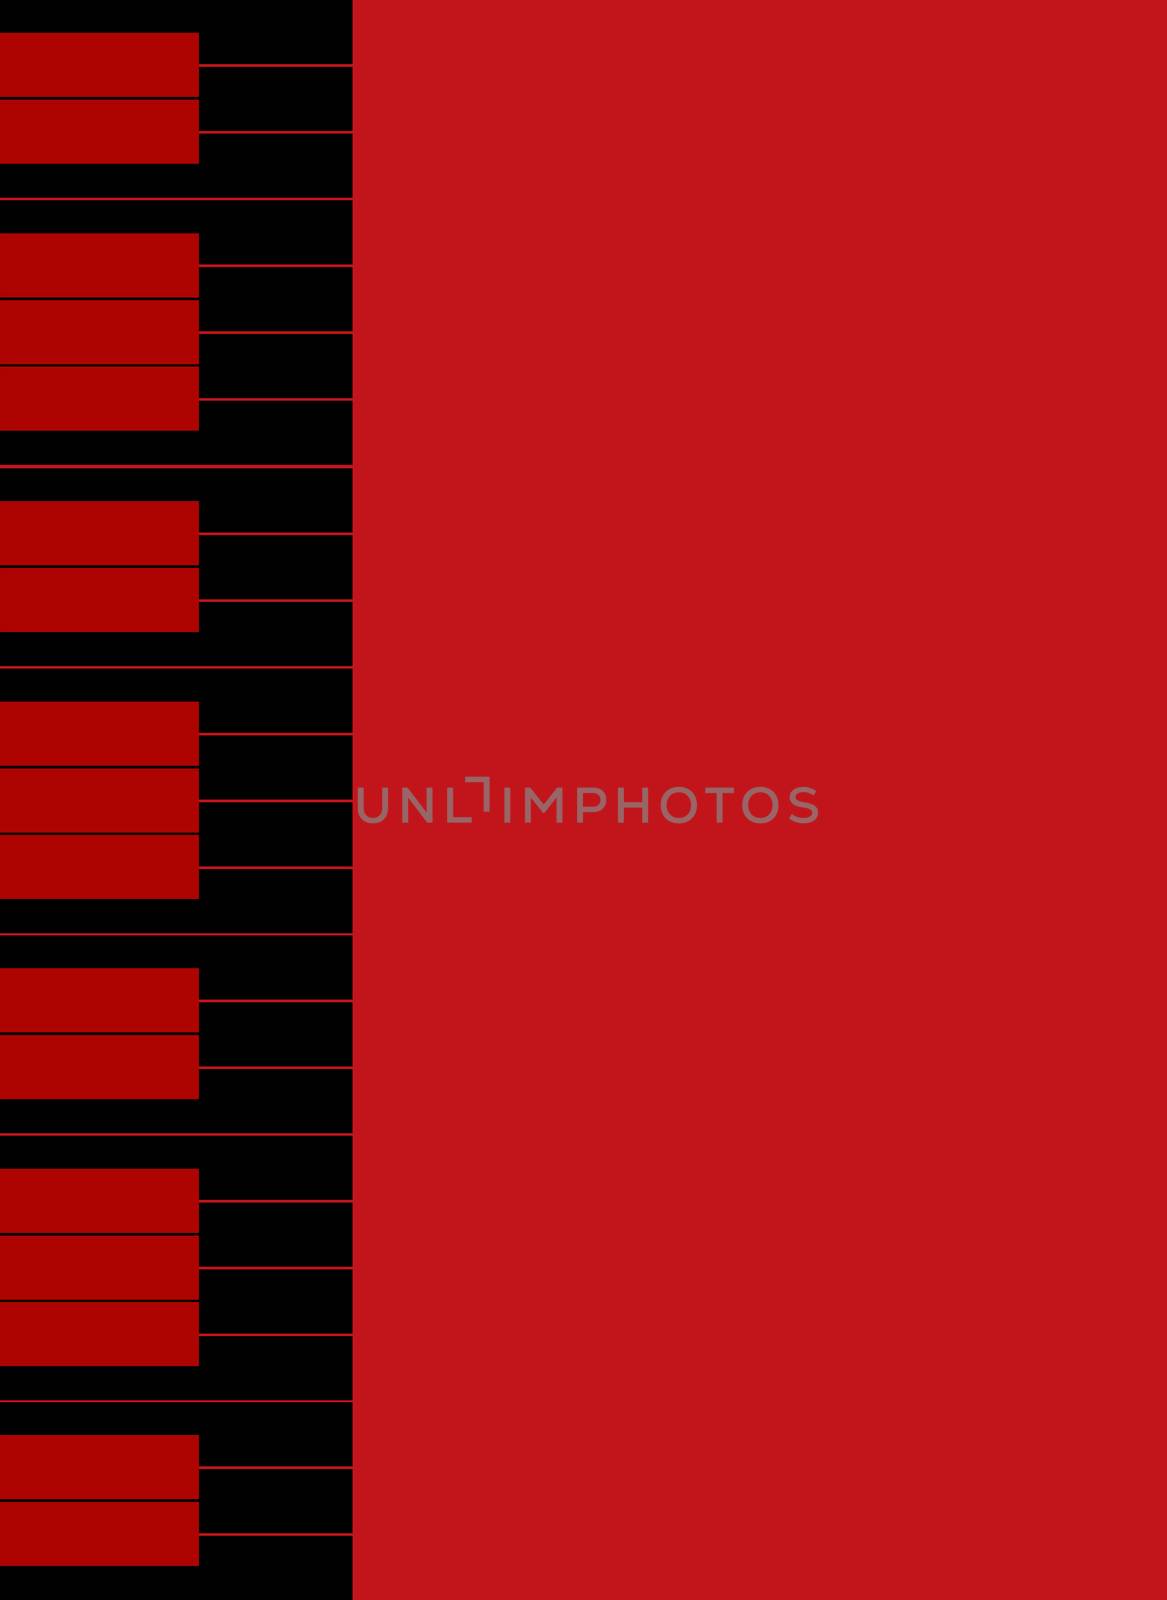 Black and red piano keys set on a dark red background.